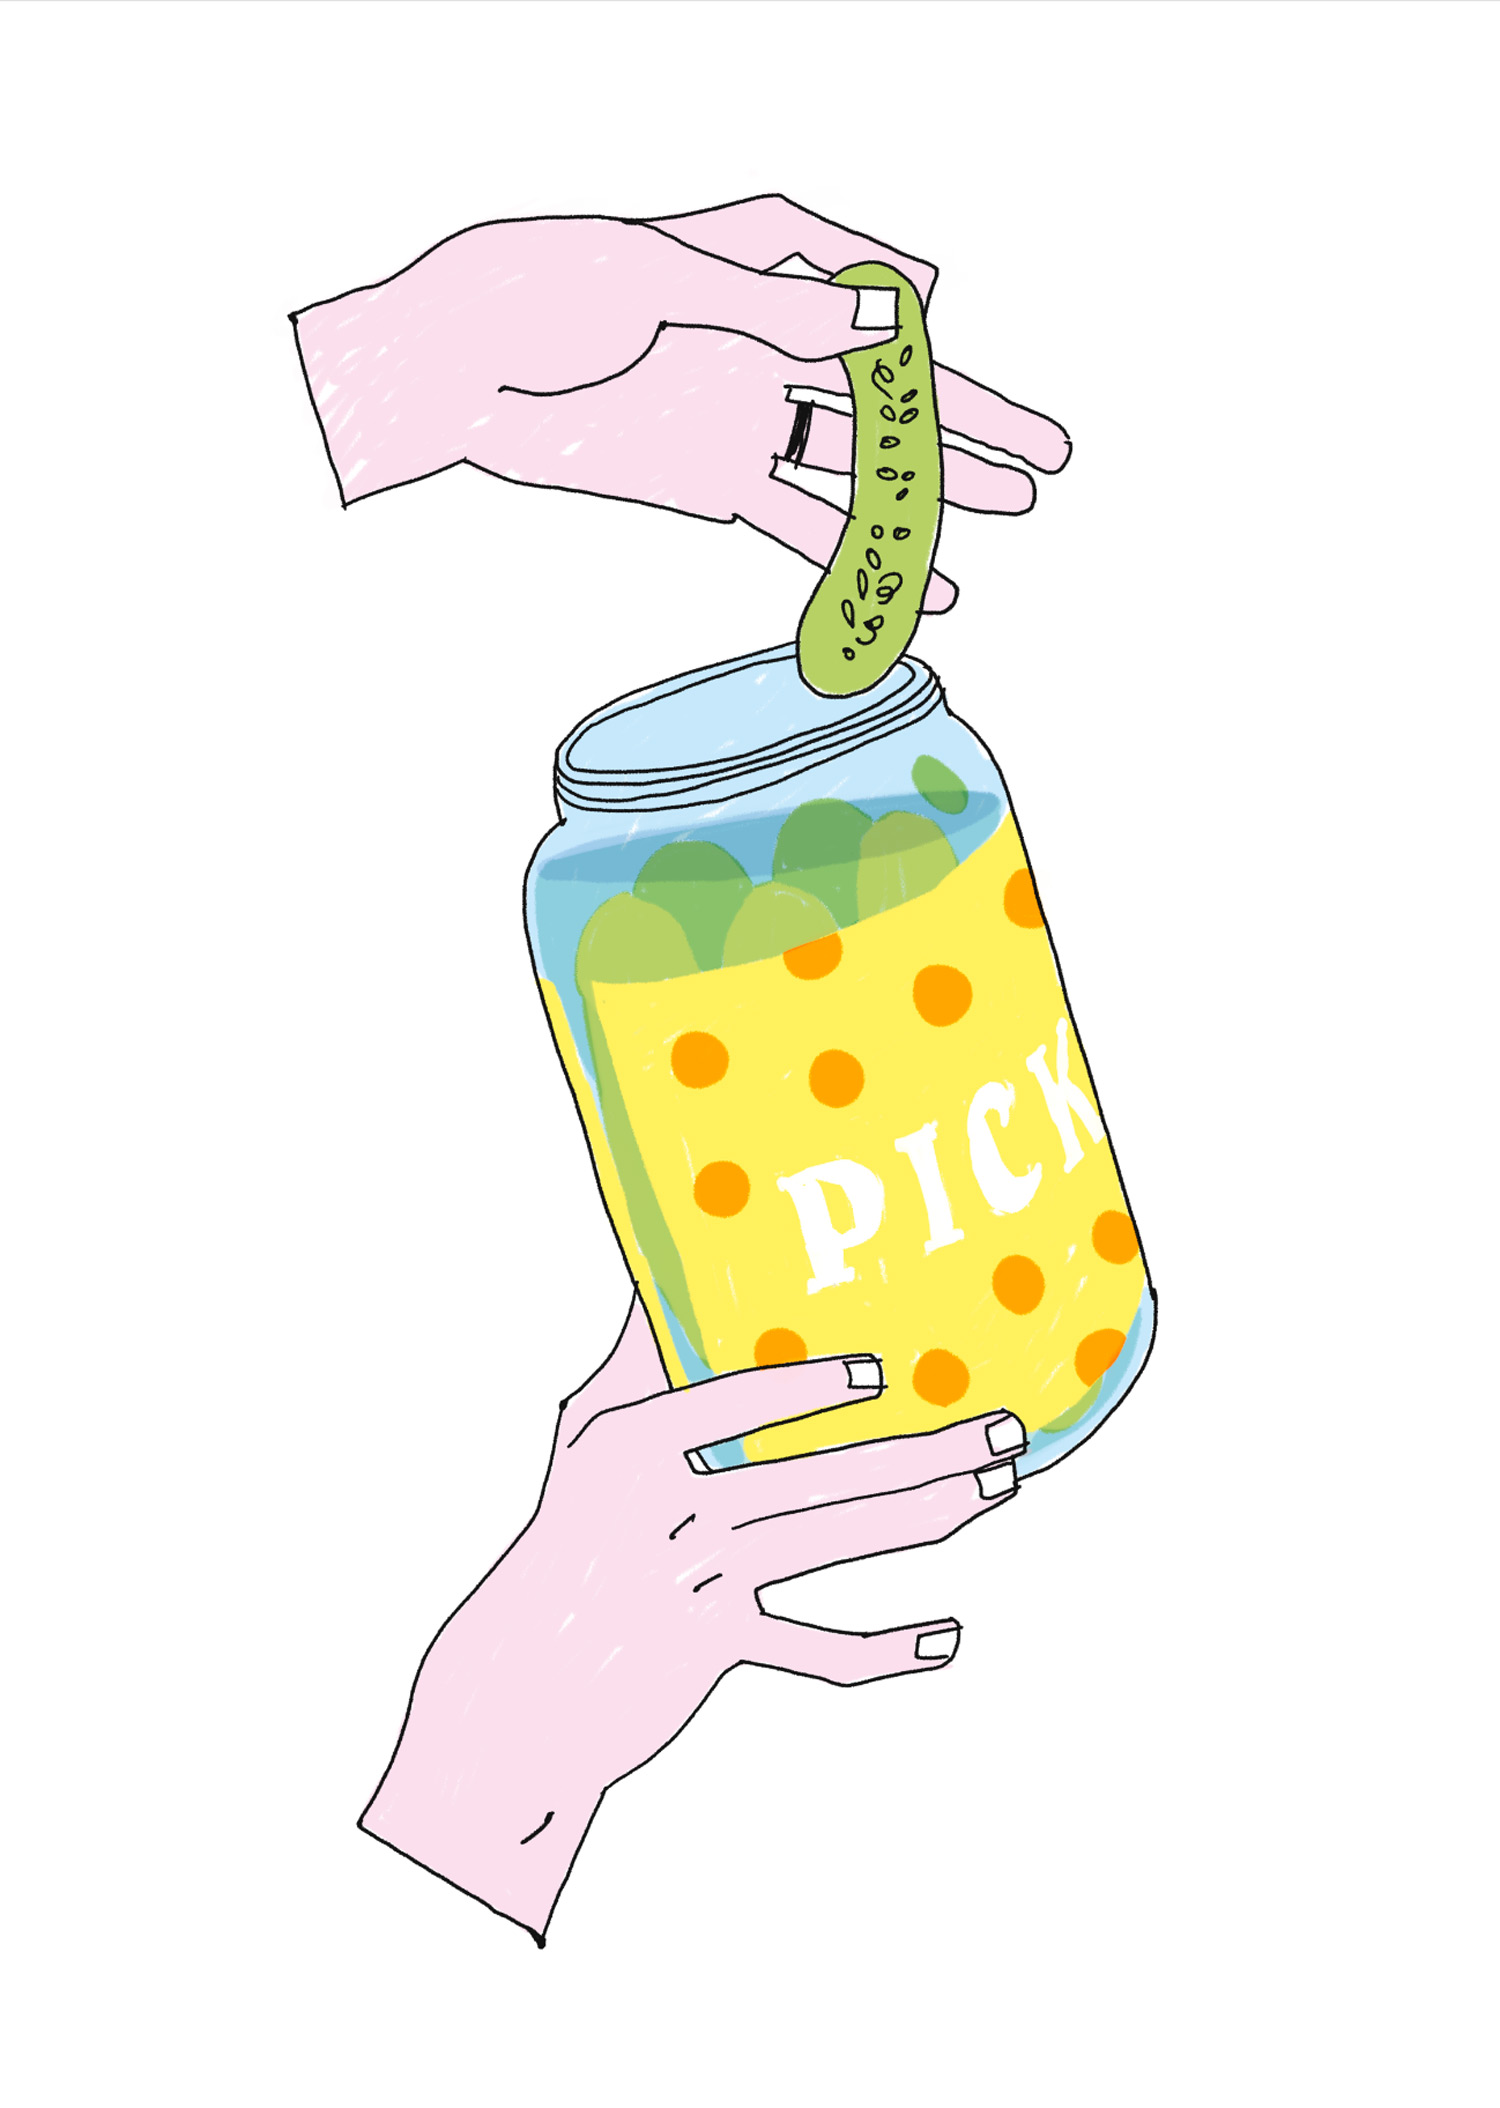 spot illustration of hands pulling a pickle out of a pickle jar